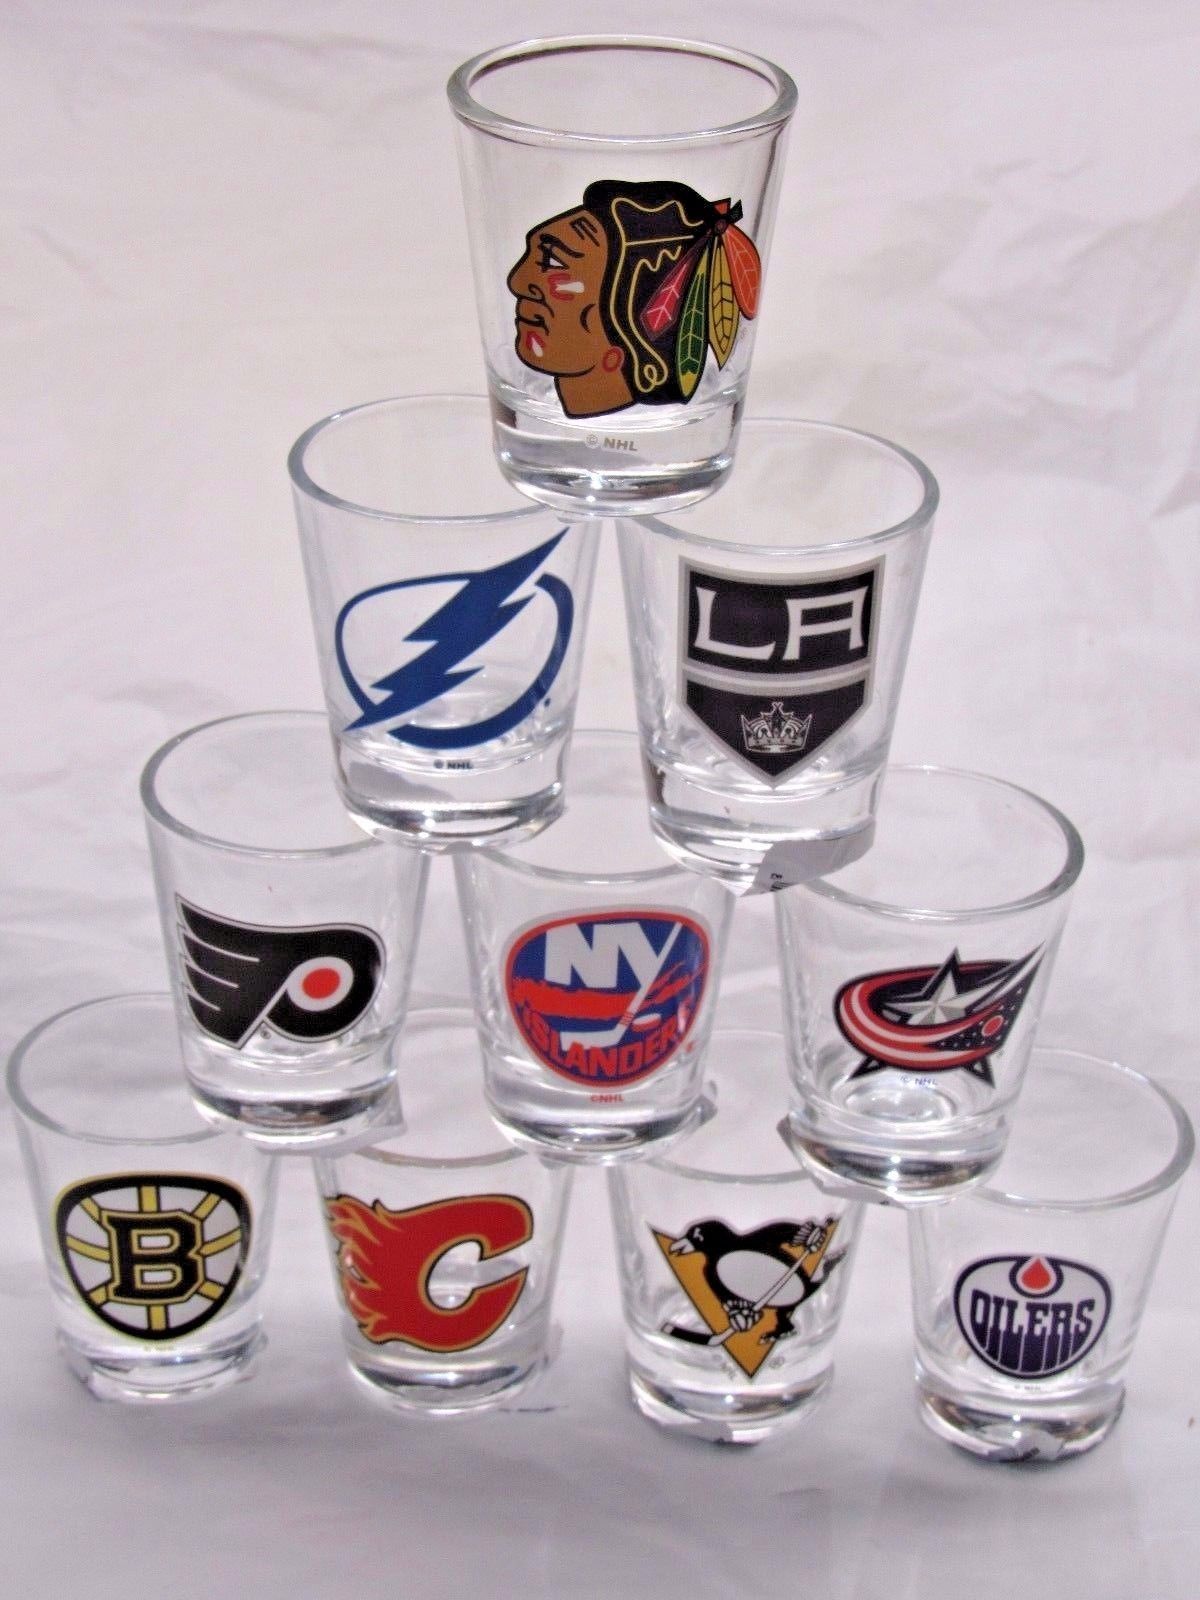 Primary image for NHL 2 oz Shot Glass with Team Logo by The Memory Co. Select Team Below